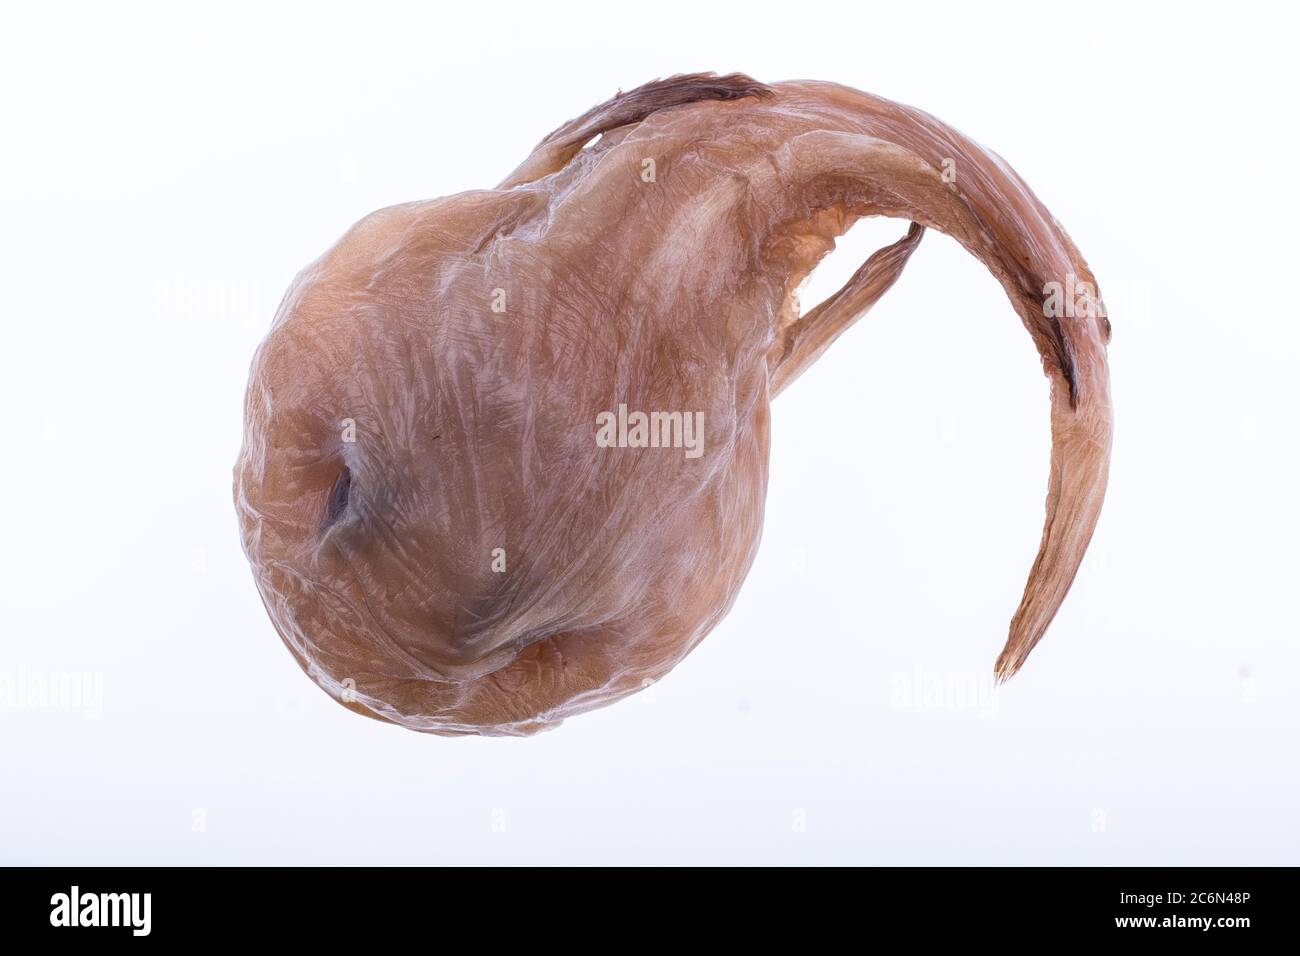 Ieo High Resolution Stock Photography and Images - Alamy